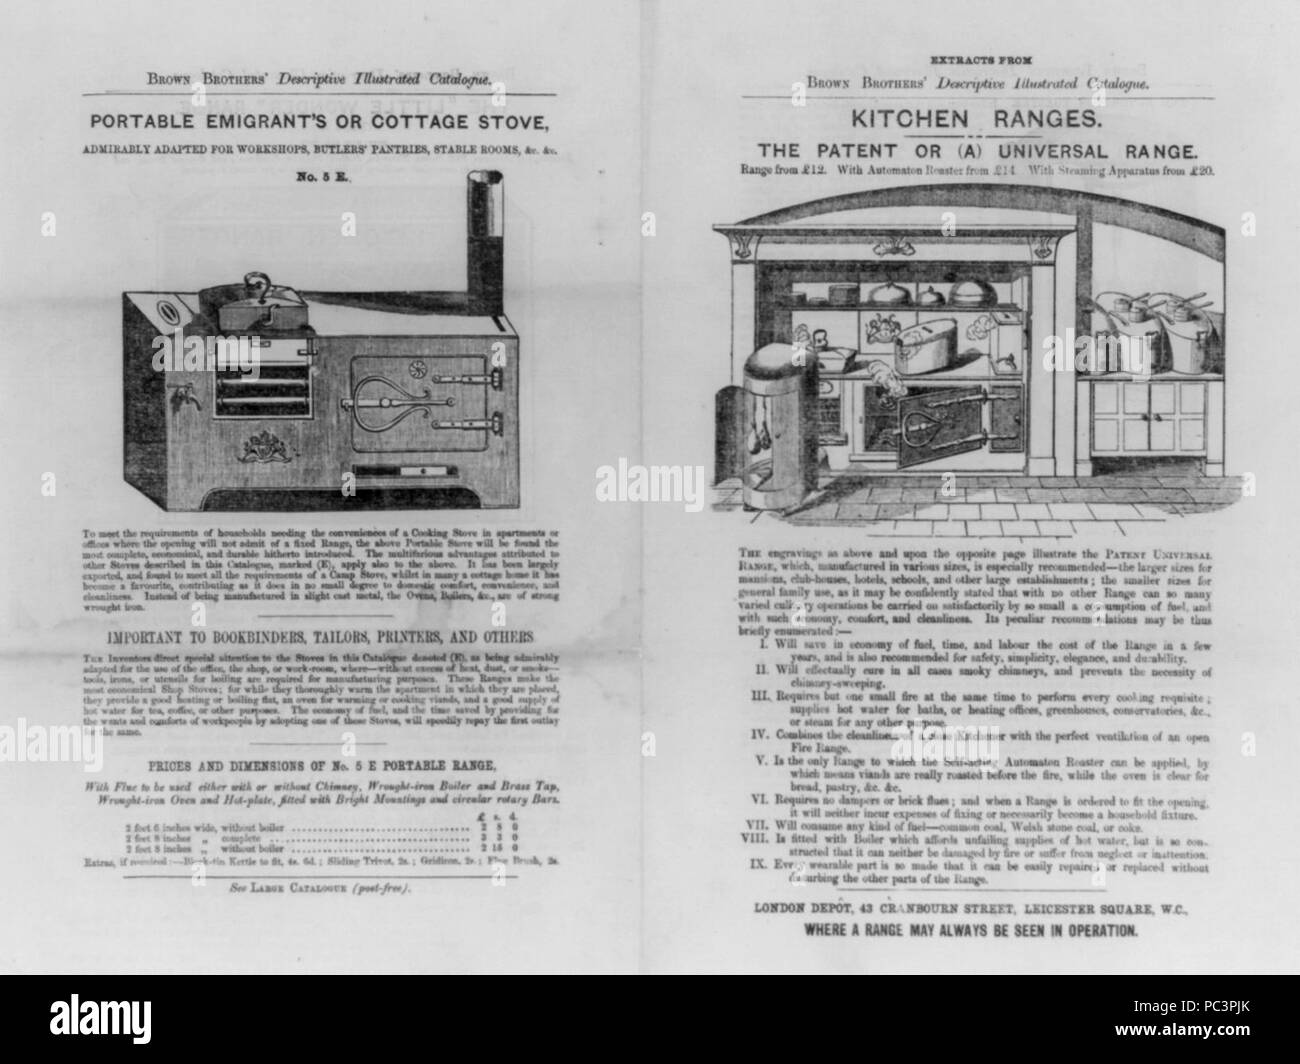 Advertisements for)- 1. Portable emigrant's or cottage stove; 2. Kitchen ranges Stock Photo